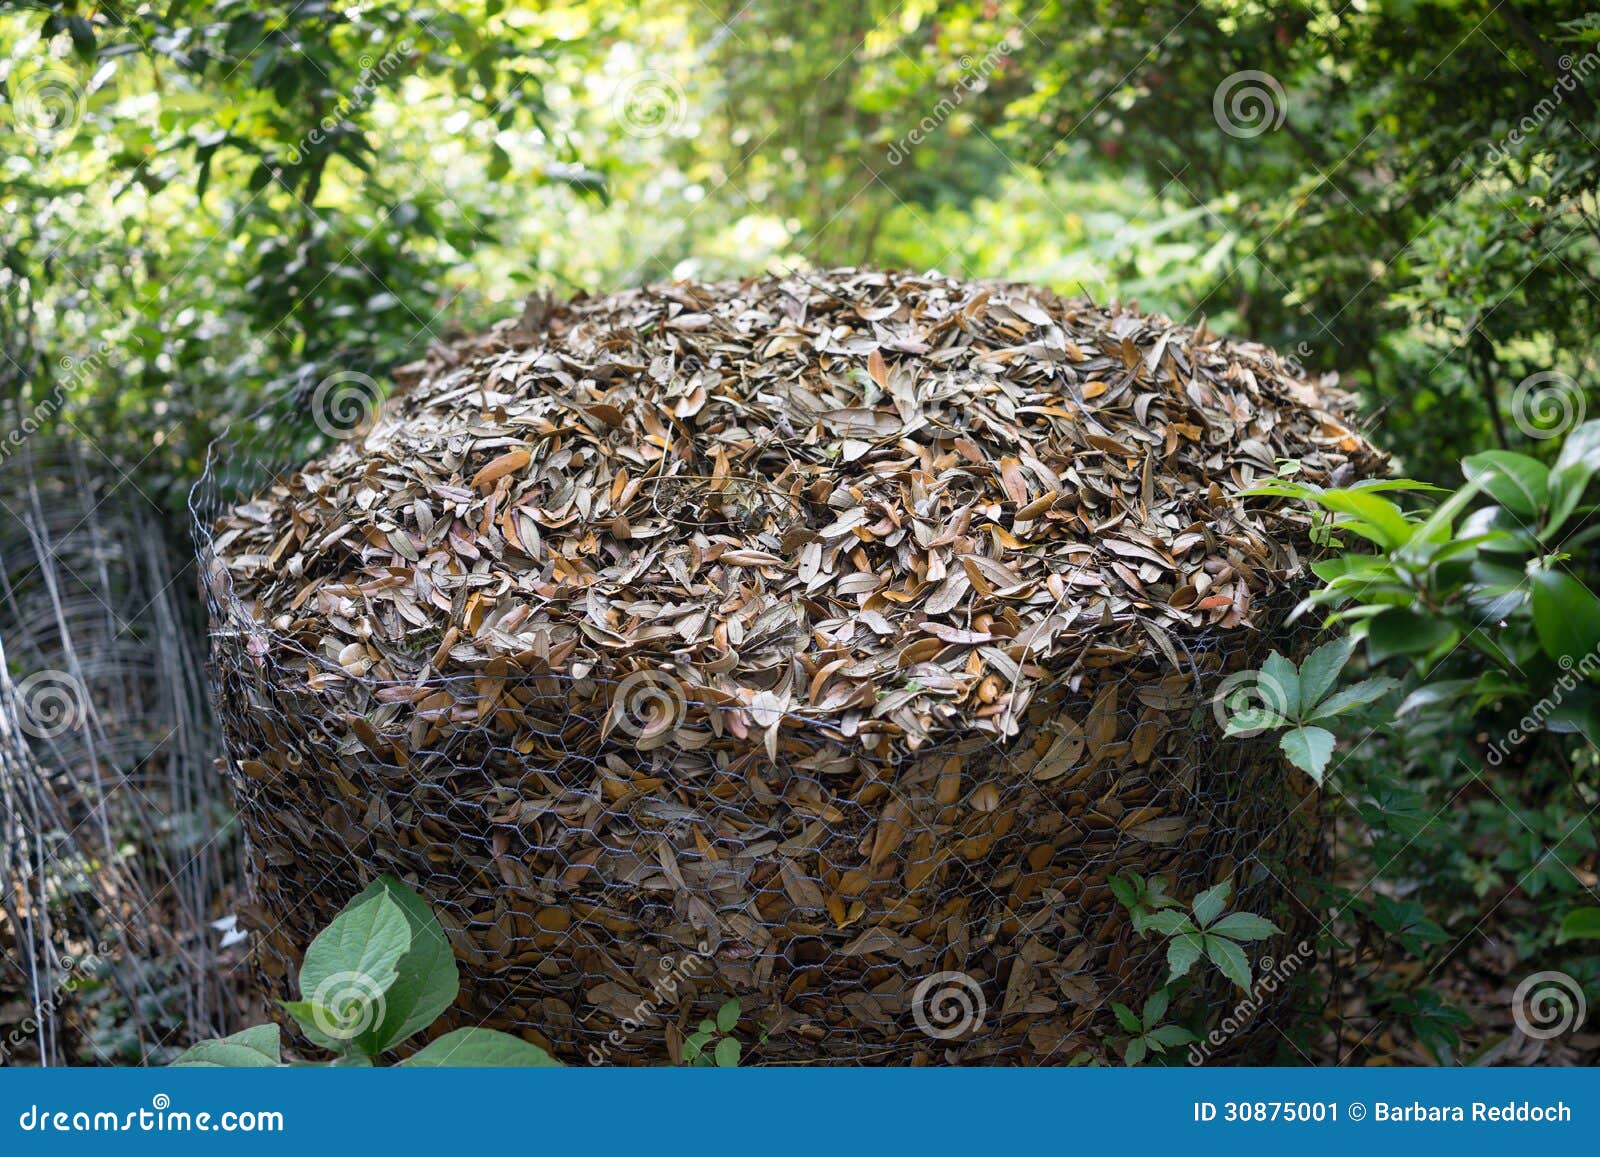 Compost Heap In Chicken Wire Enclosure Stock Image - Image ...